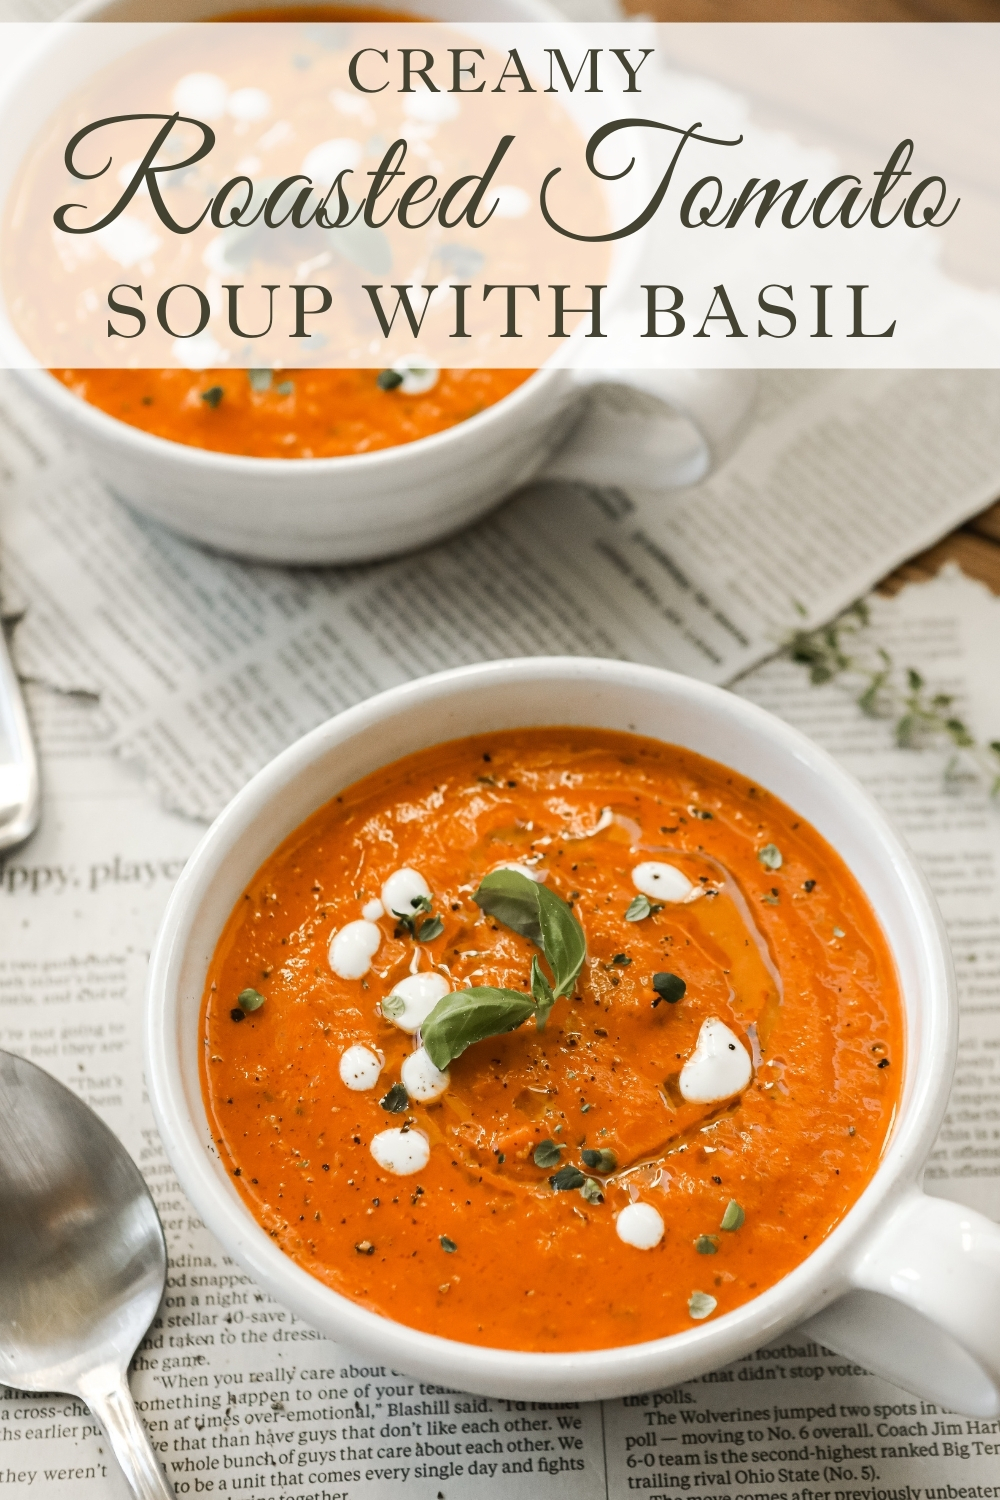 Creamy Tomato Soup with basil